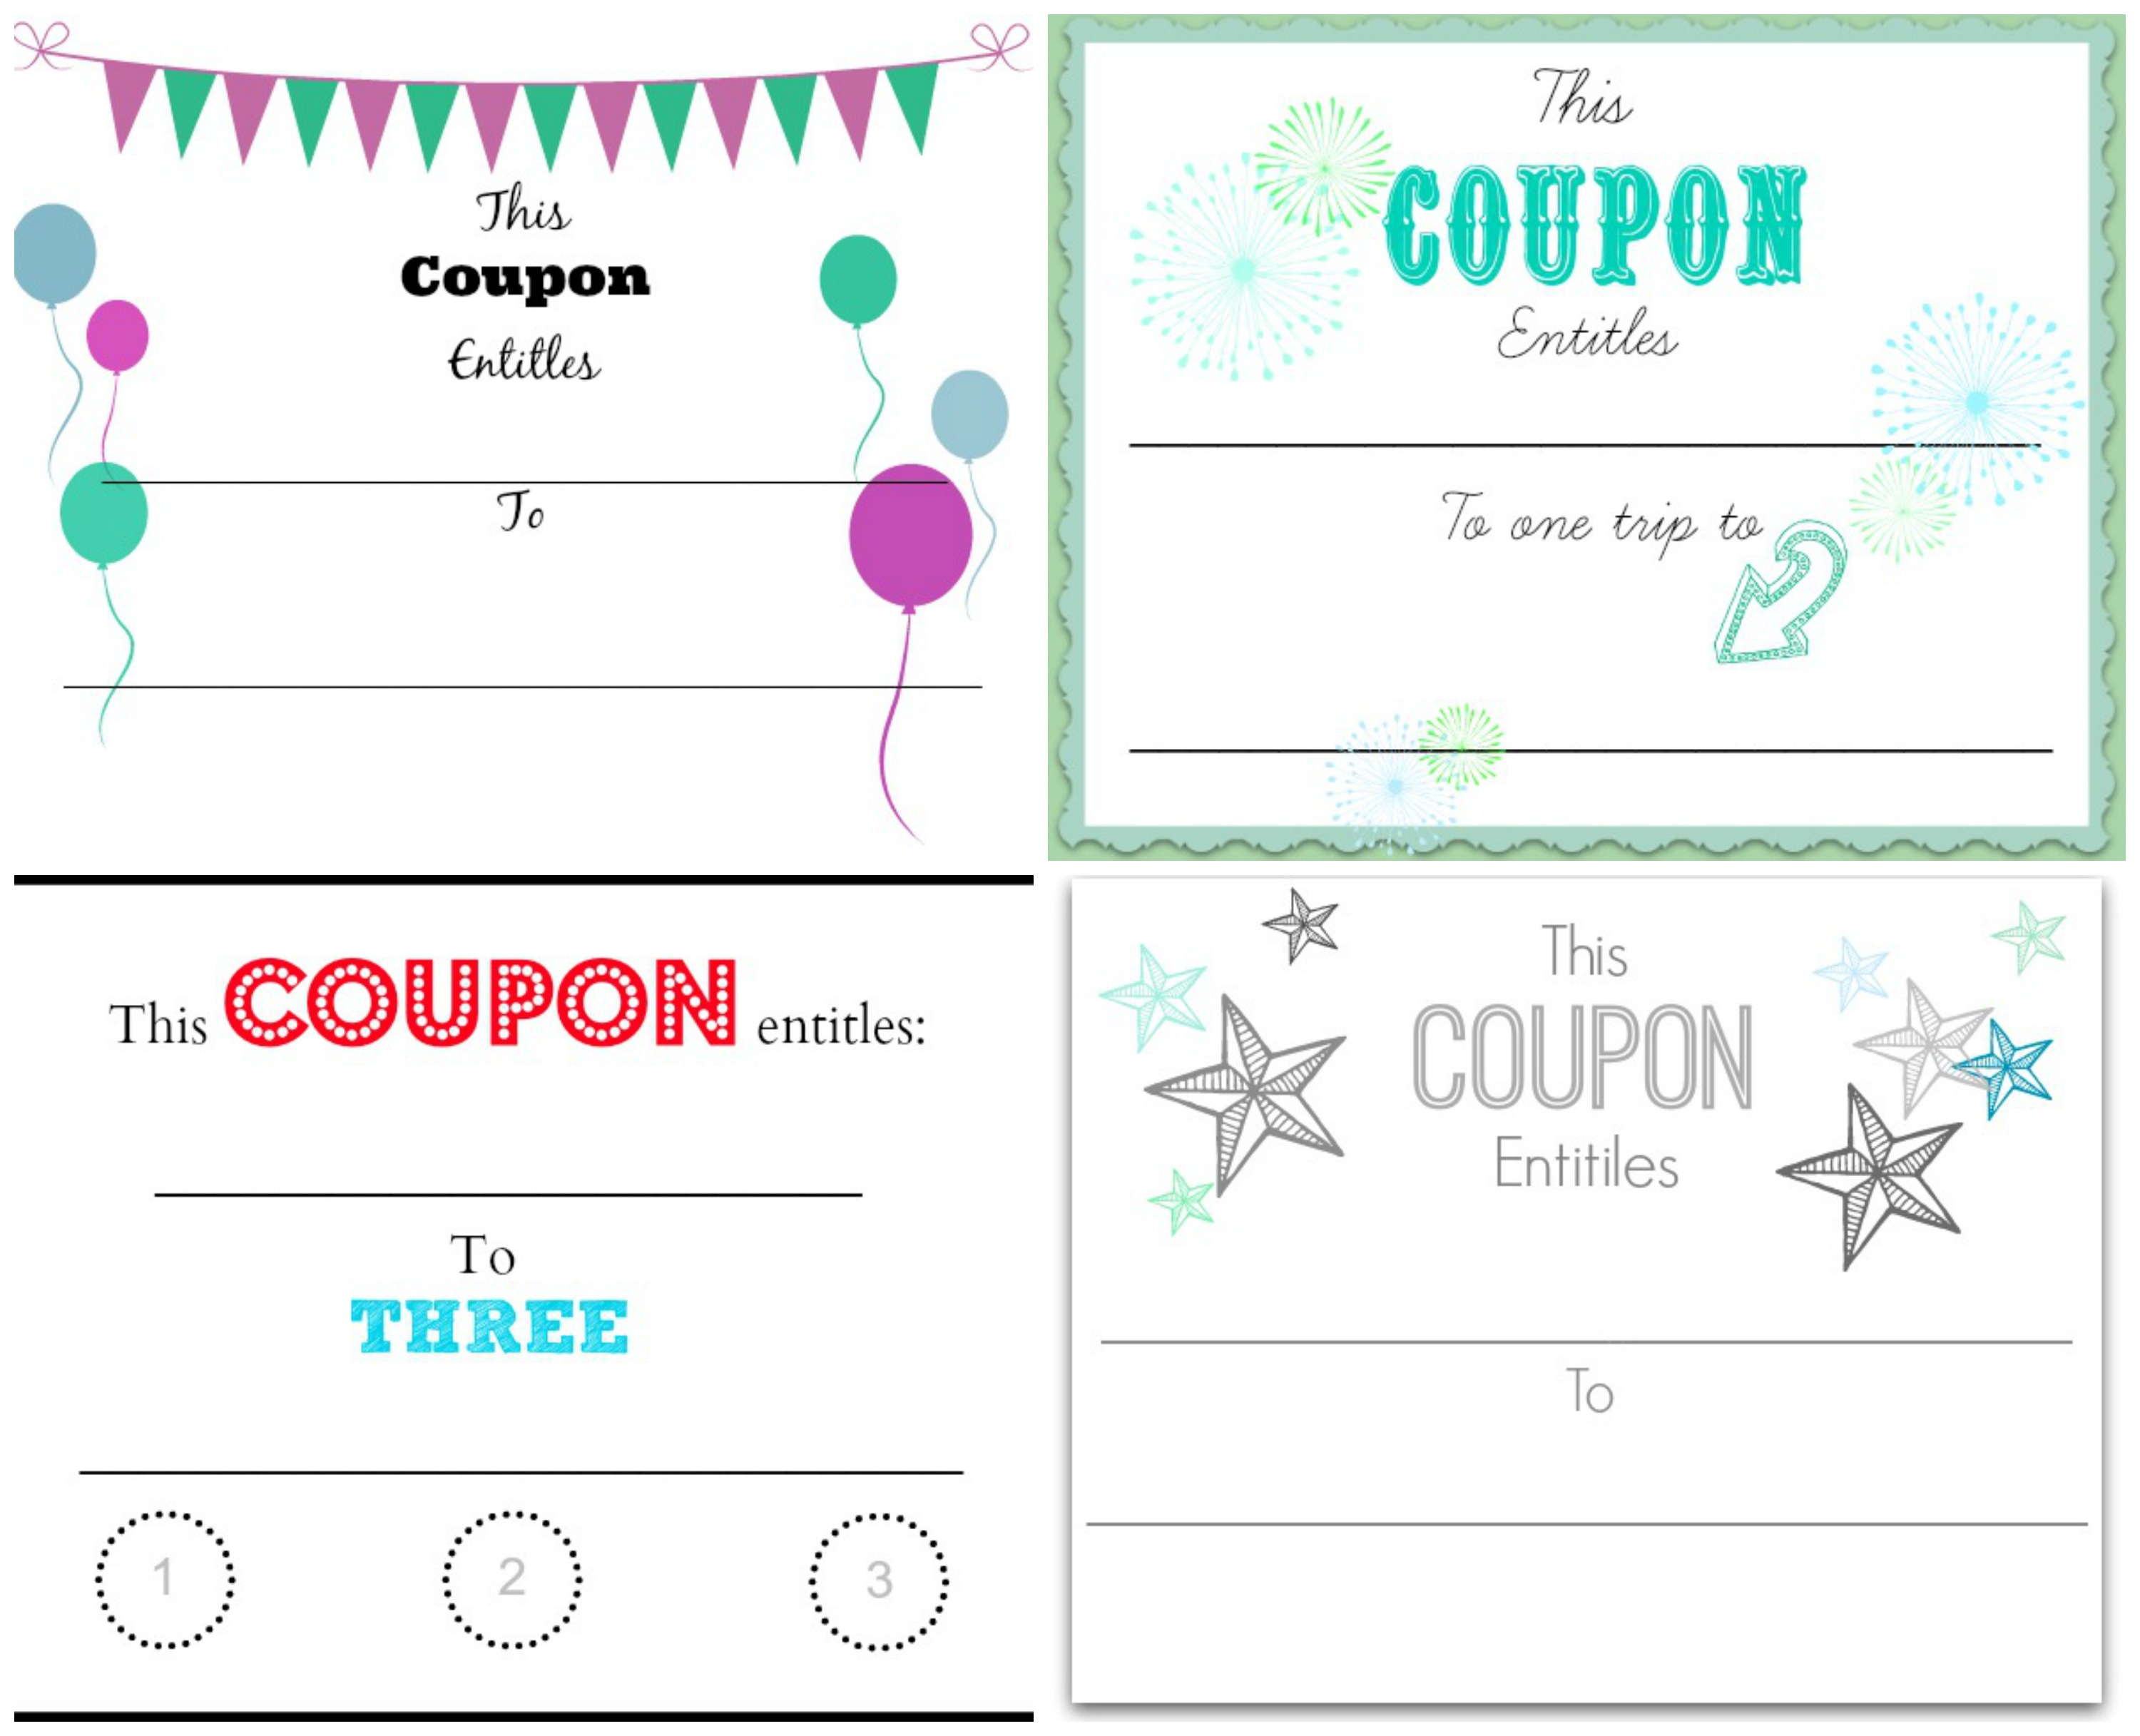 six-popular-grocery-coupons-to-print